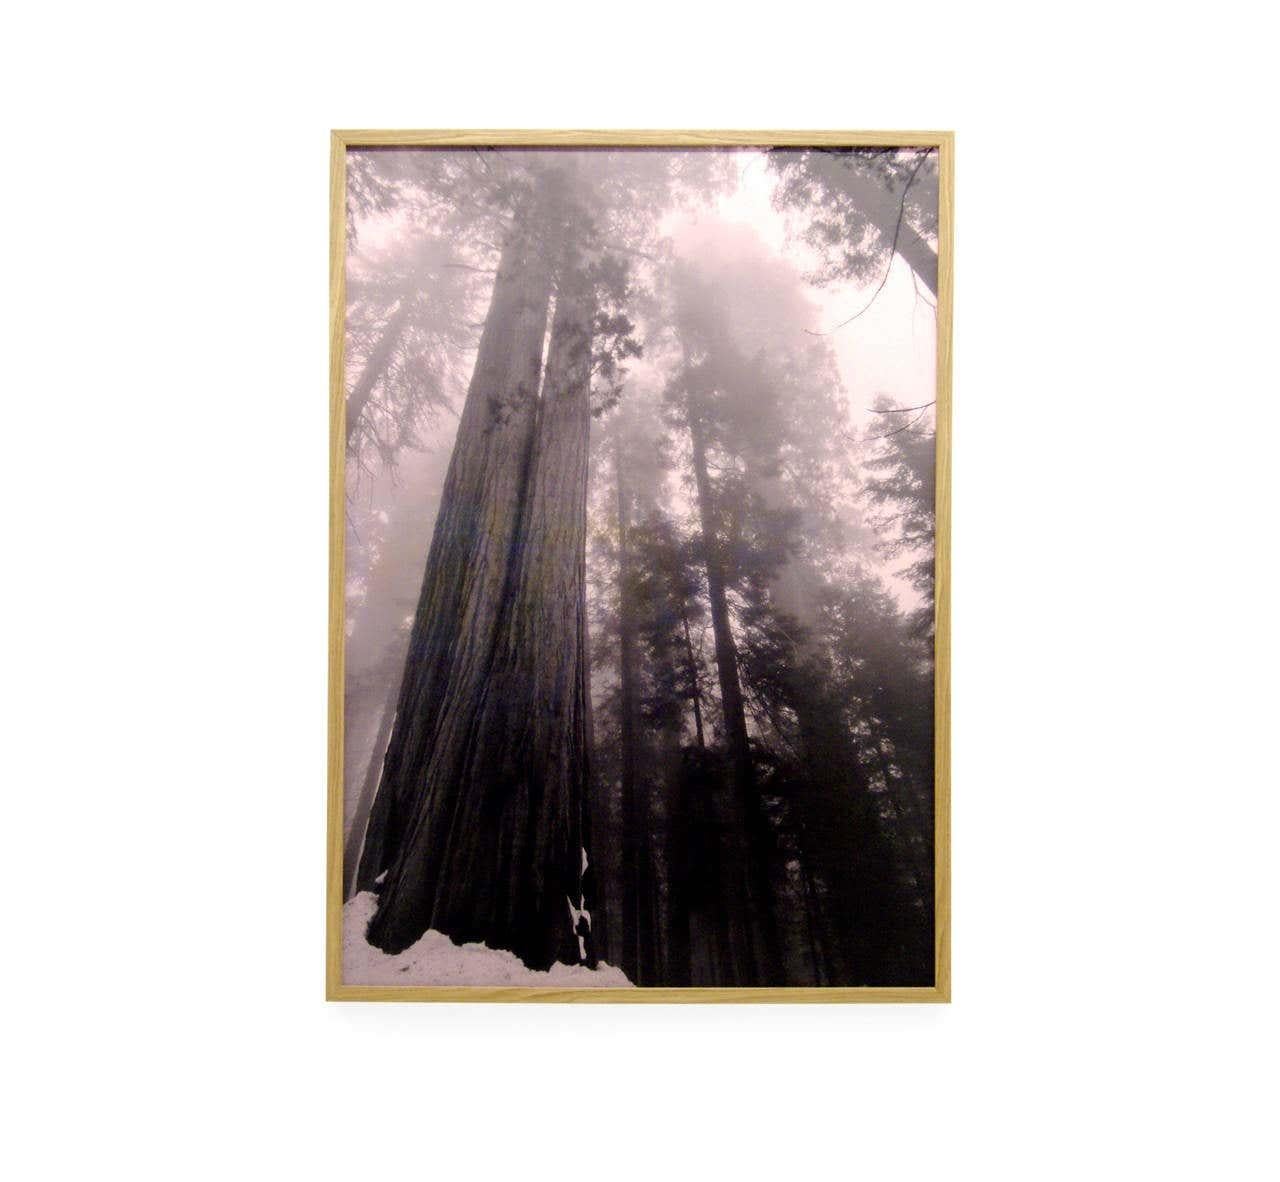 Large and unique print titled Can Not Be Pictured – OH NO OH NO! (The Sequoias).

Digital collage from digital photography [2011].

Diptych, toner print on 90 g pink paper, mounted on Kapafix.

Glass and oak coated frames. 

Measures: Each